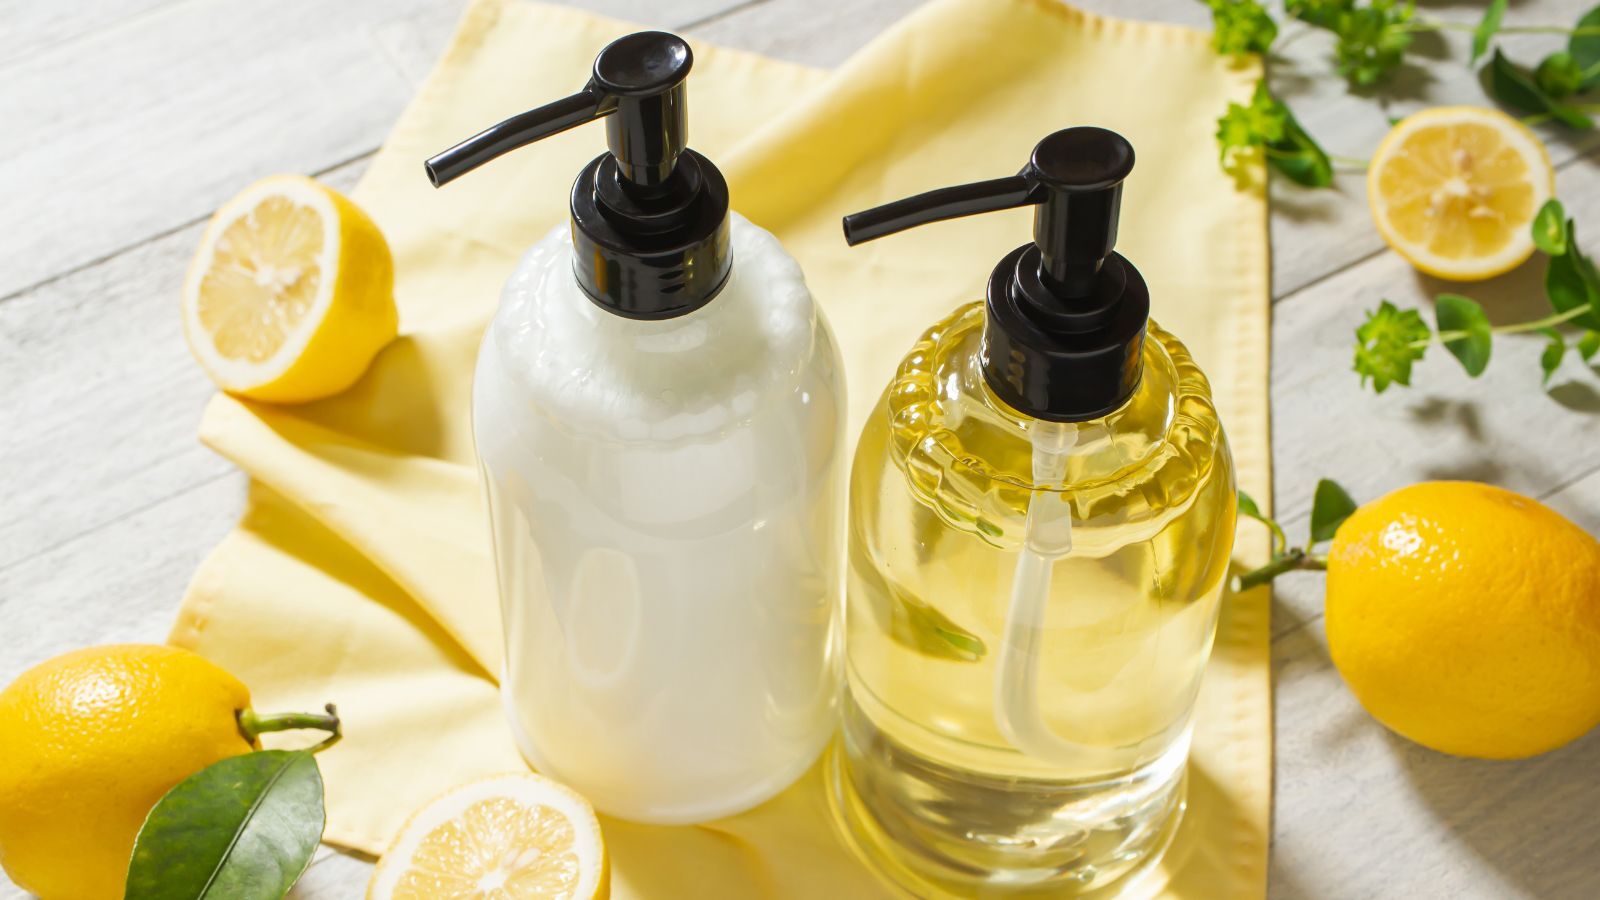 14 Best Natural Shampoo Brands [Without Toxic Chemicals] for All Hair Types 2023